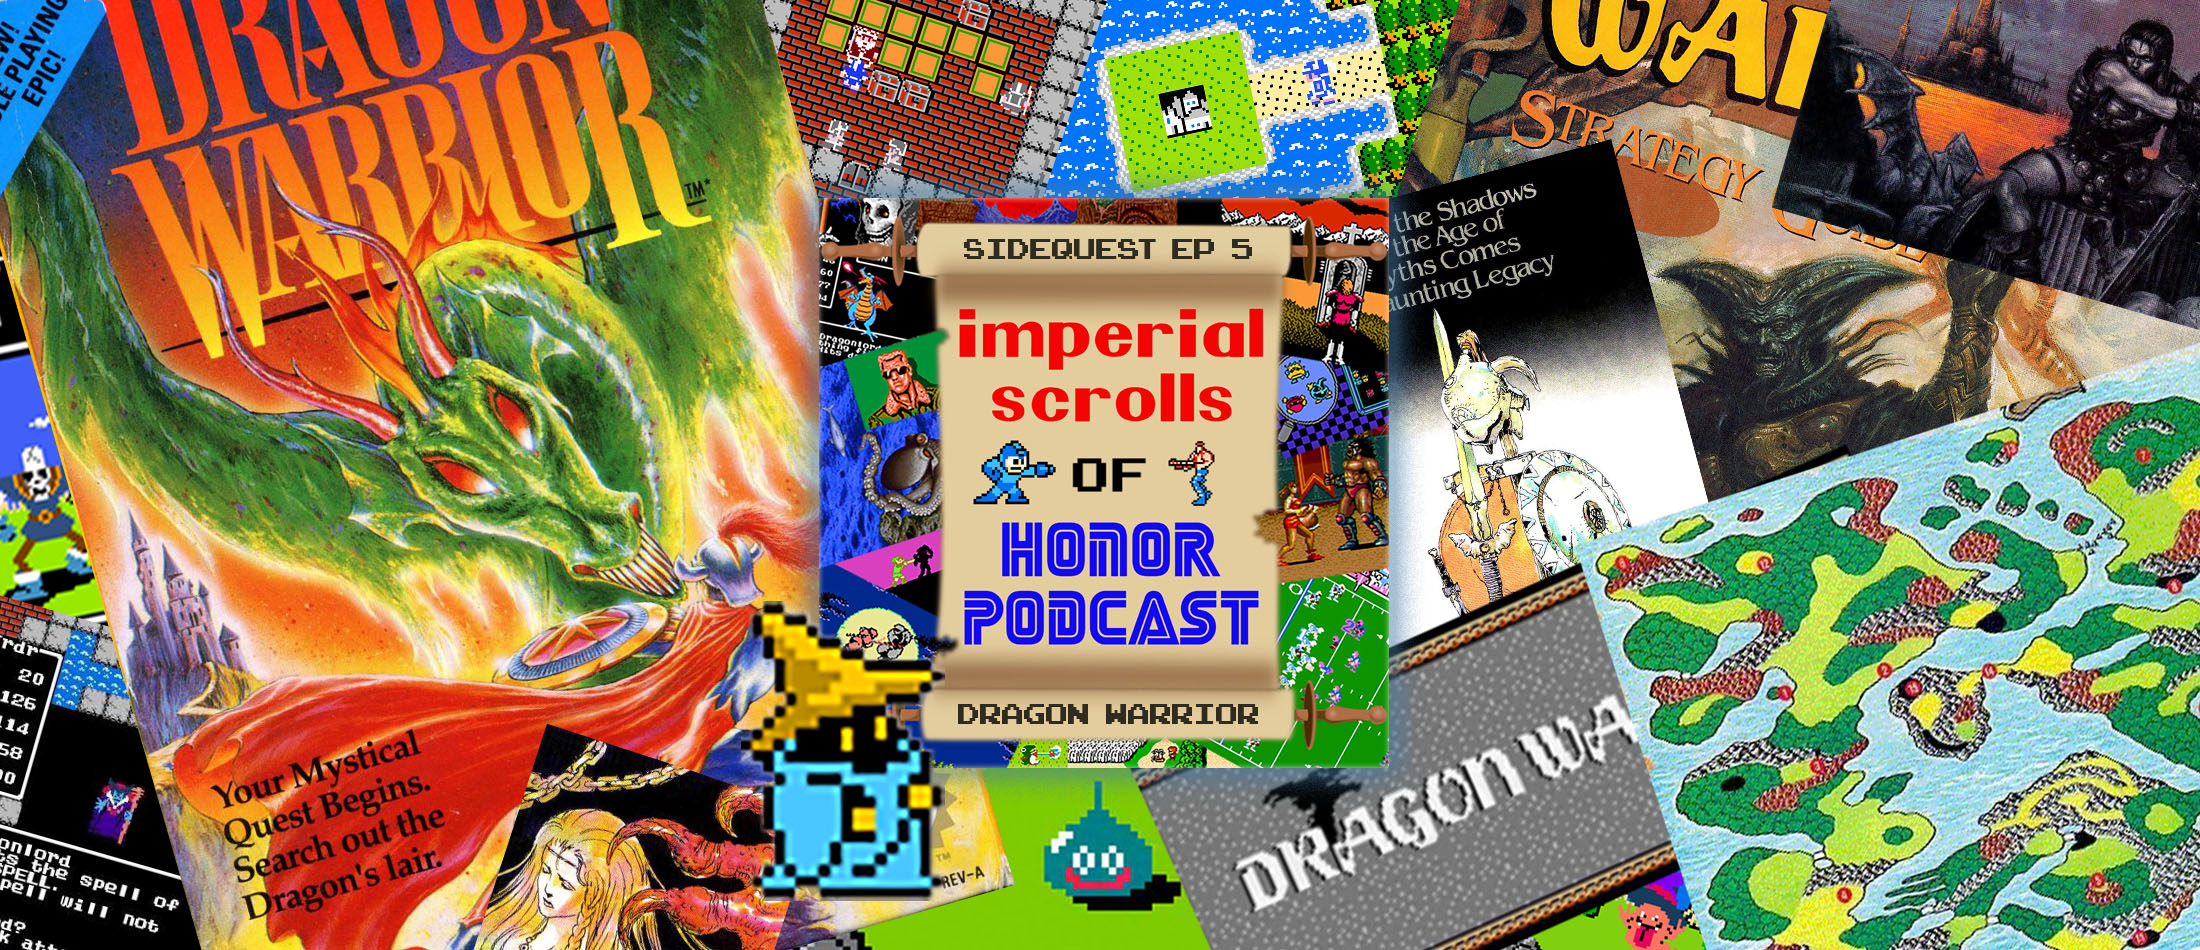 Imperial Scrolls of Honor Podcast - SIDEQUEST: Dragon Warrior 5